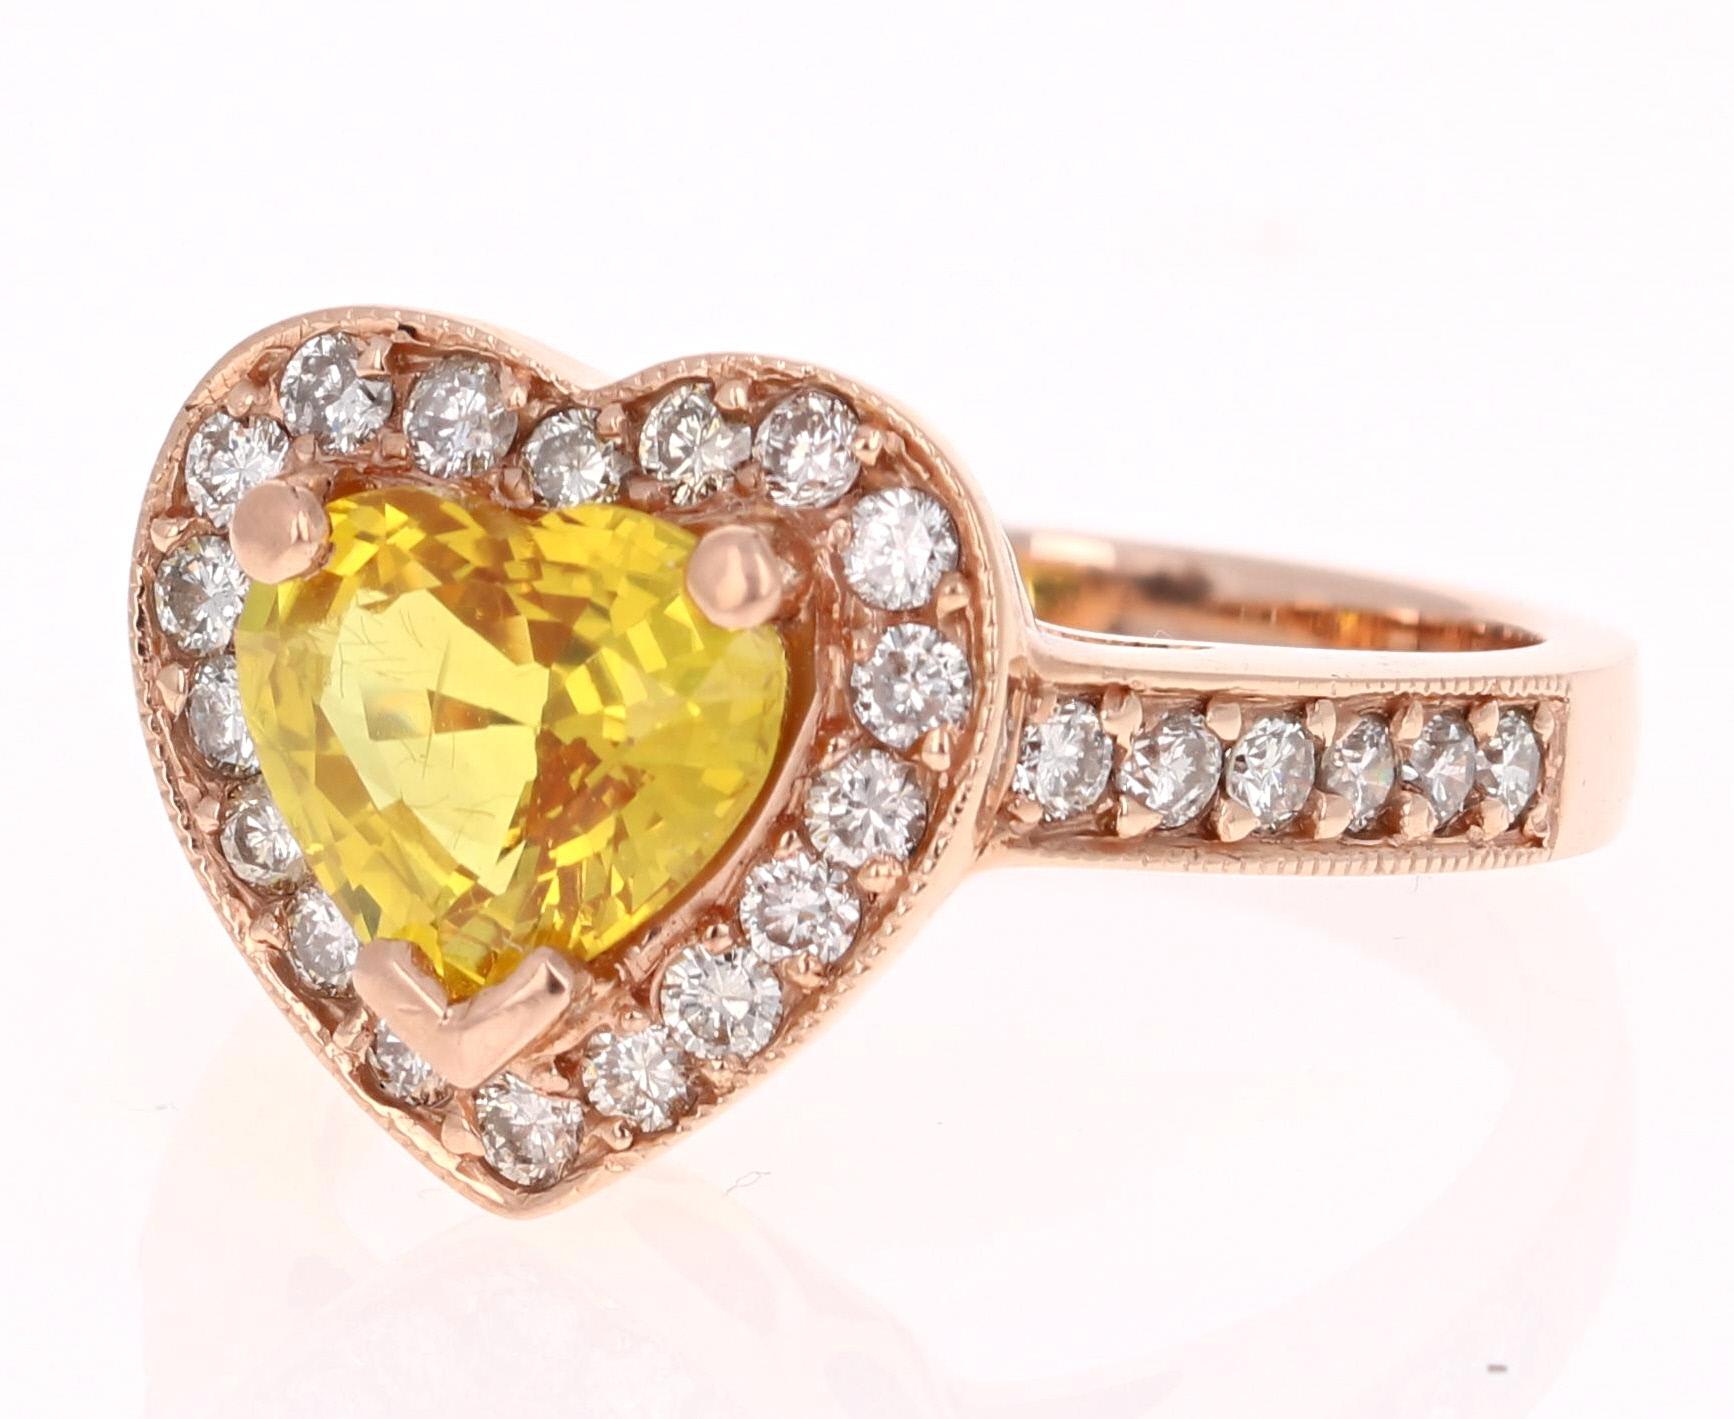 Beautiful Heart Cut Sapphire and Diamond Ring that can be that special someone's Engagement Ring.

This ring has a 2.02 carat Heart Cut Yellow Sapphire in the center of the ring and is surrounded by a halo 30 Round Cut Diamonds that weigh 0.69